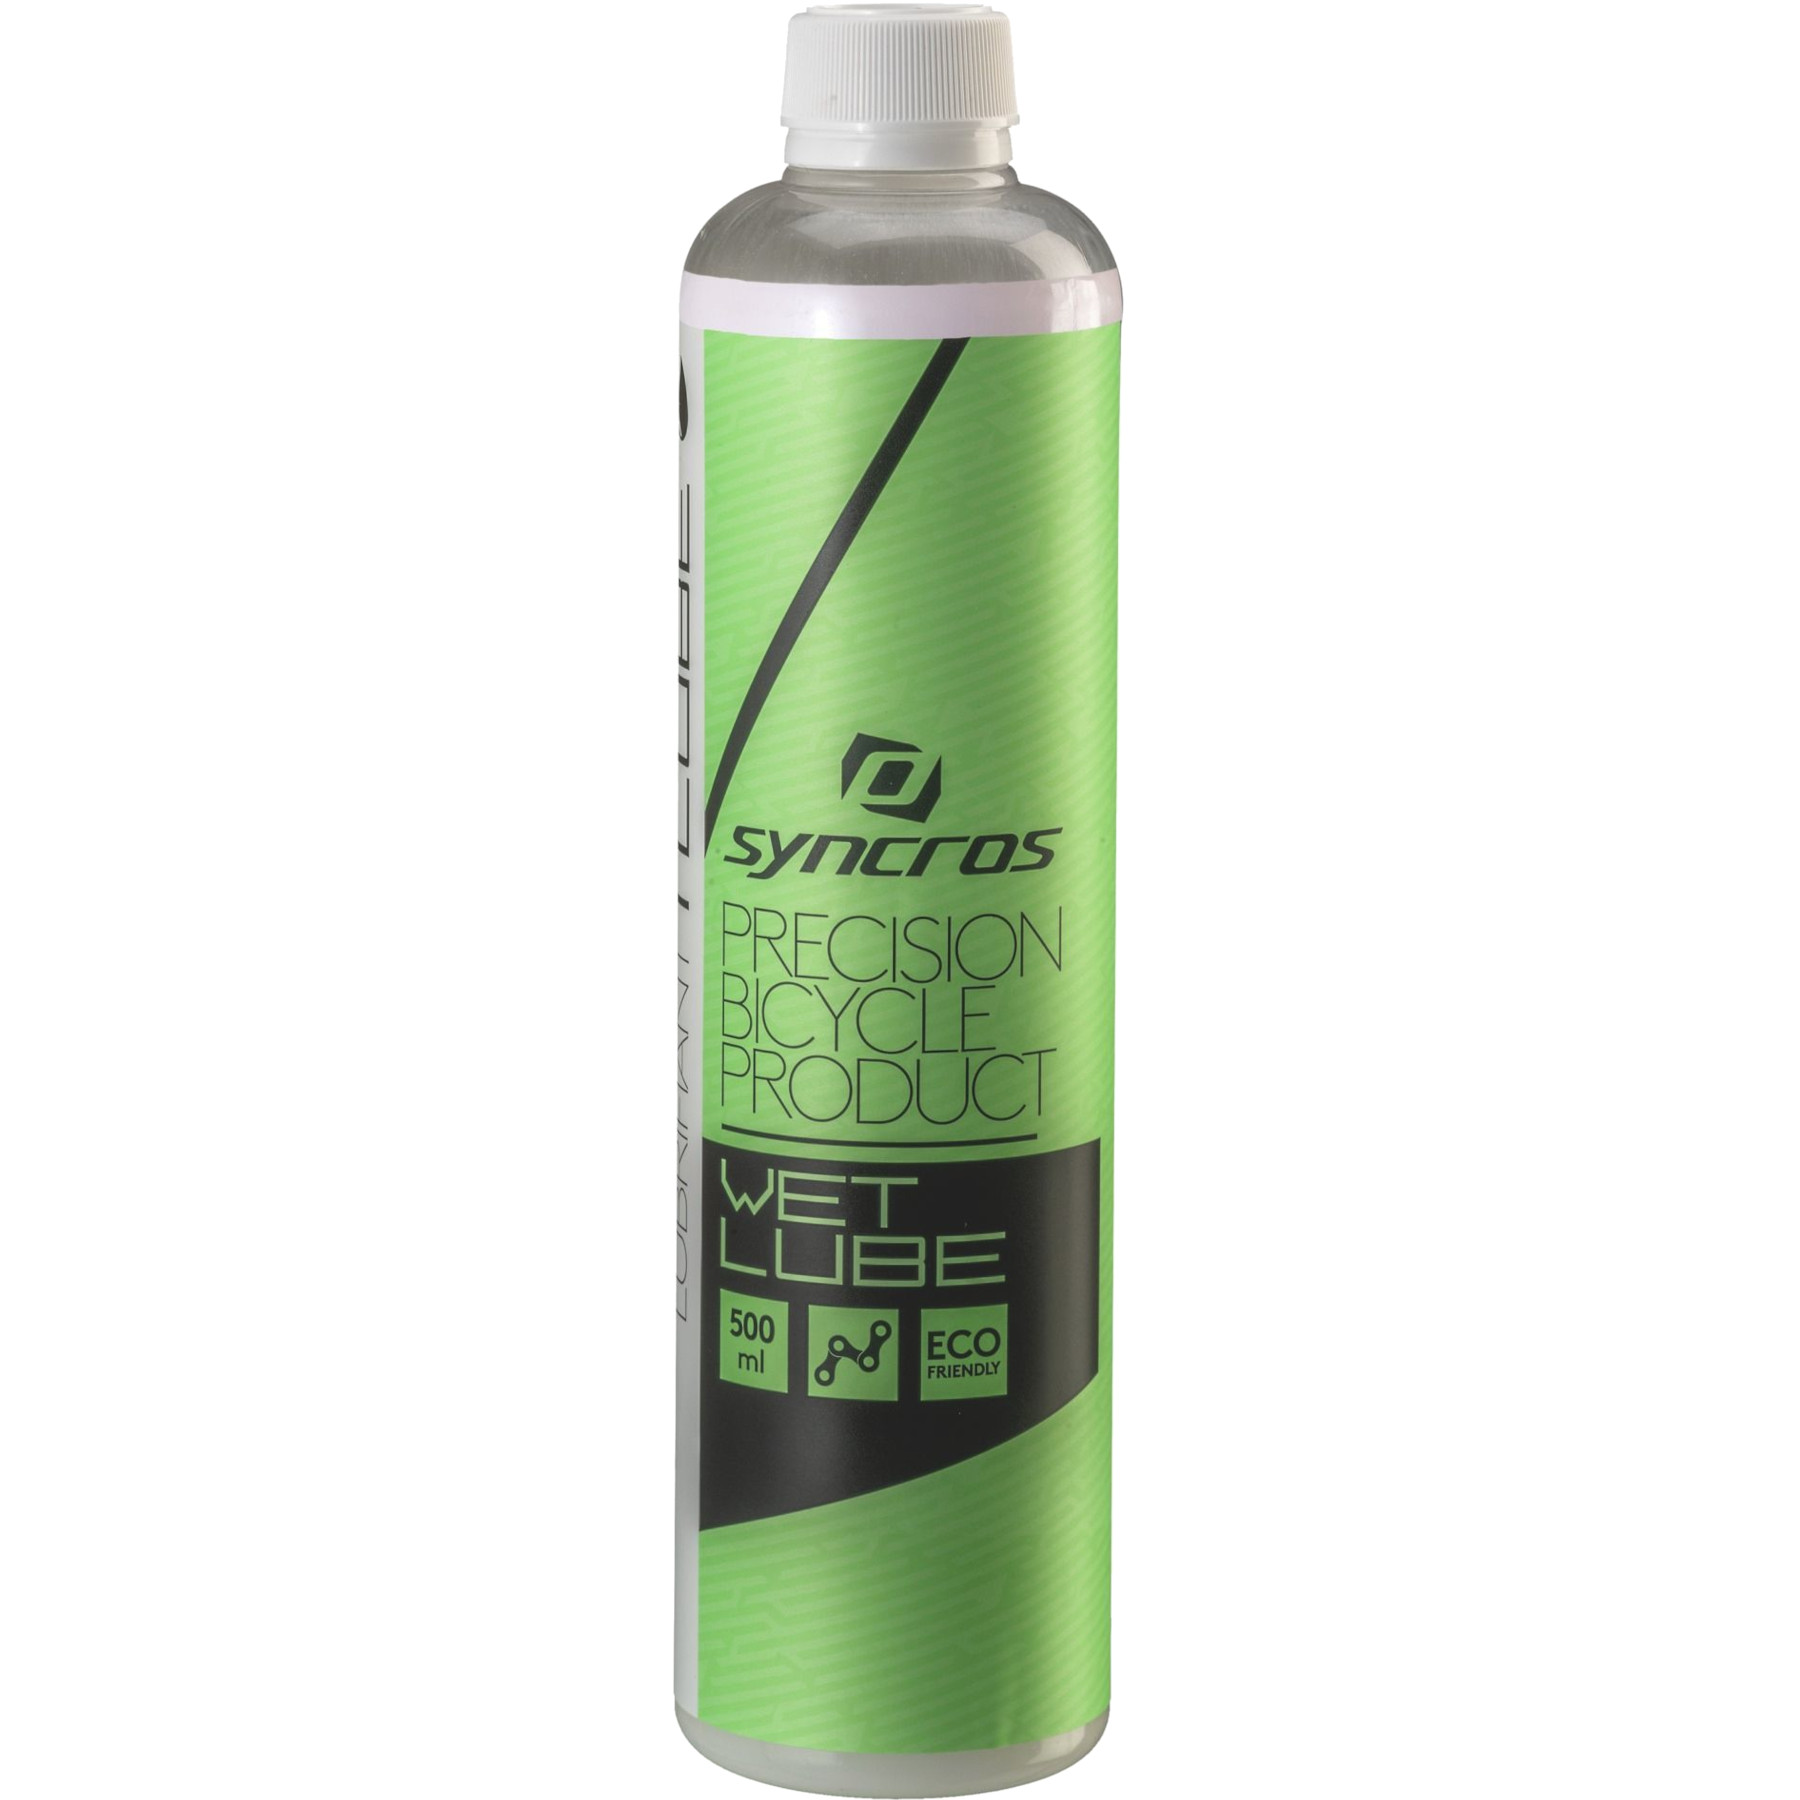 Picture of Syncros Wet Lube - 500ml